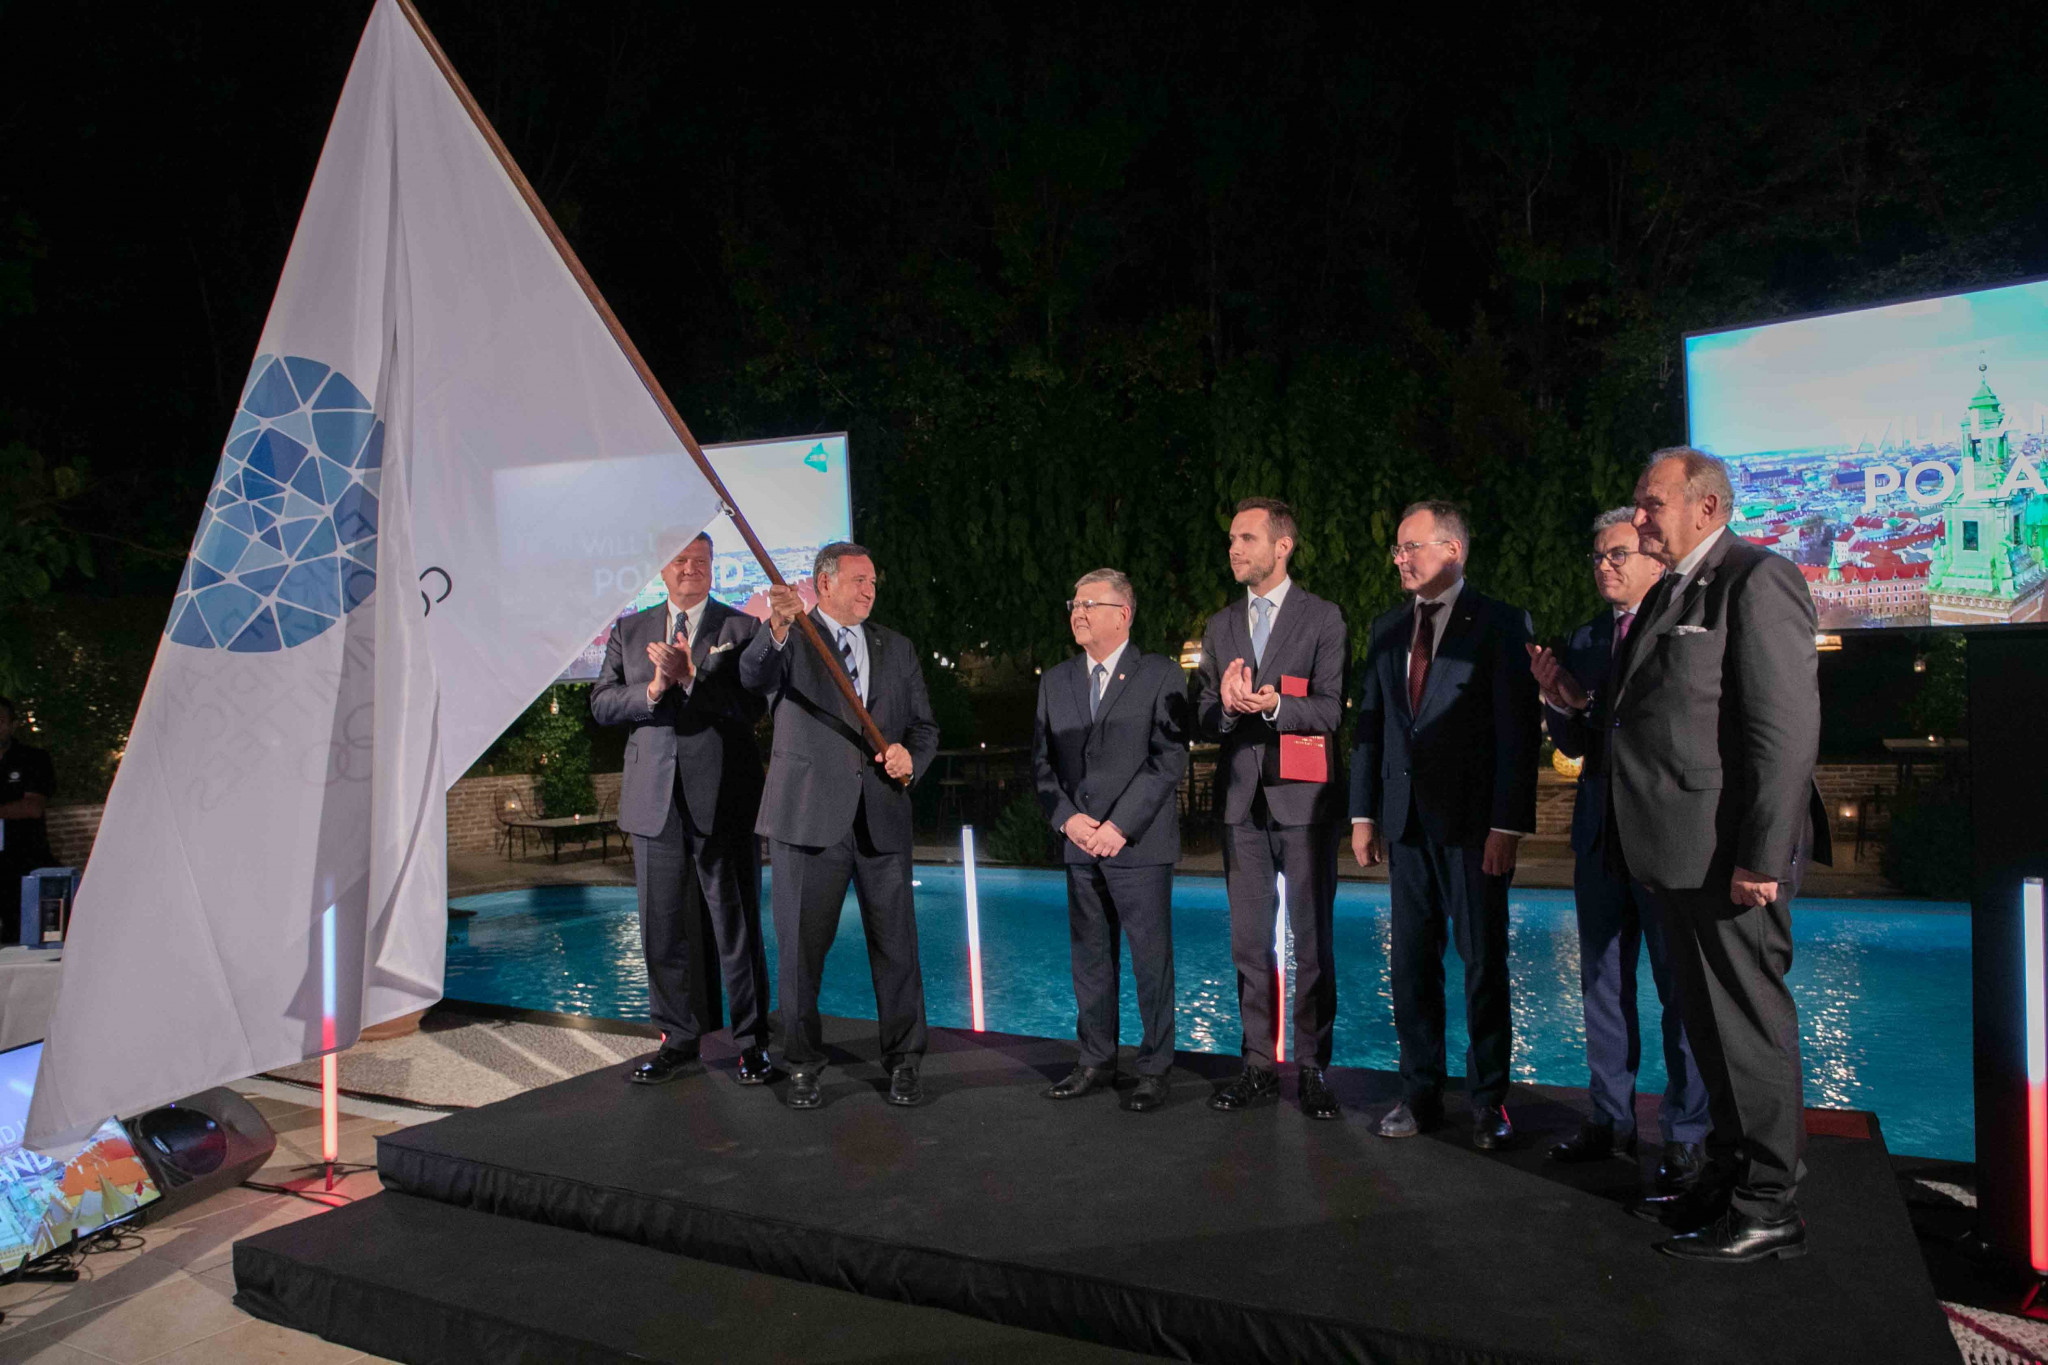 The EOC flag was presented to Polish officials with just under nine months to go until the European Games are due to be held in Kraków and the Małopolska region ©EOC